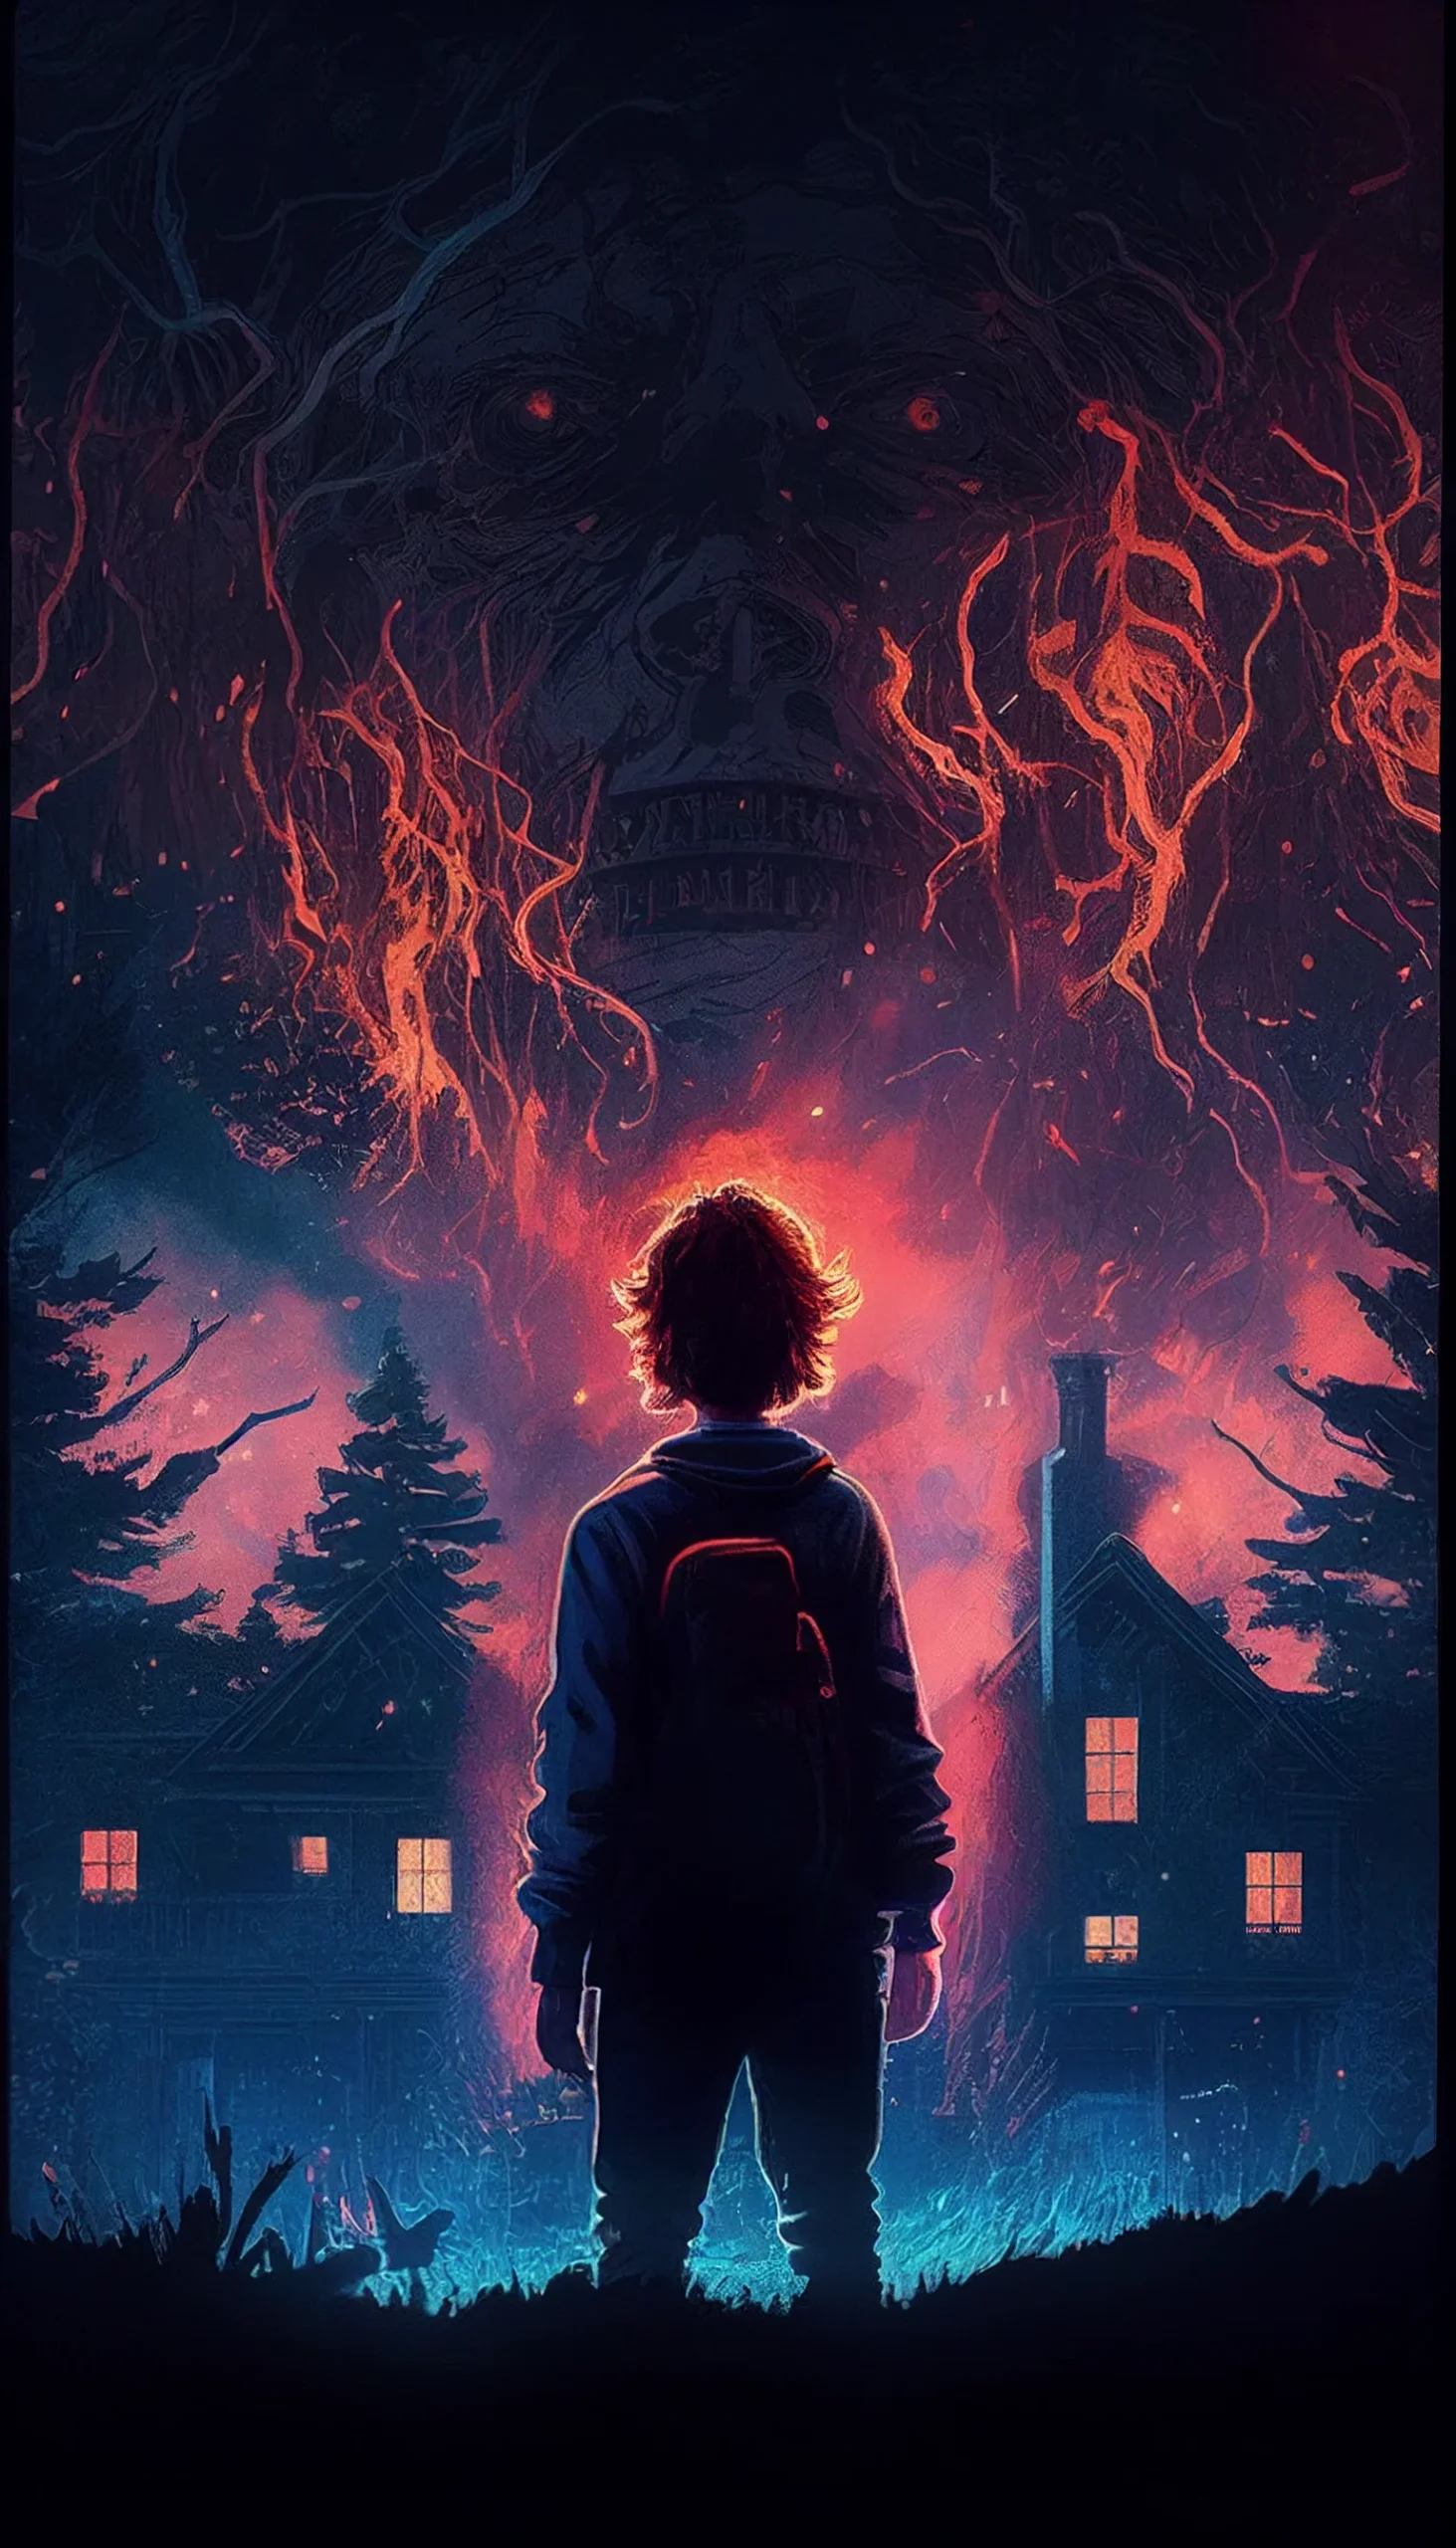 The best Stranger Things phone wallpaper you can find - Stranger Things